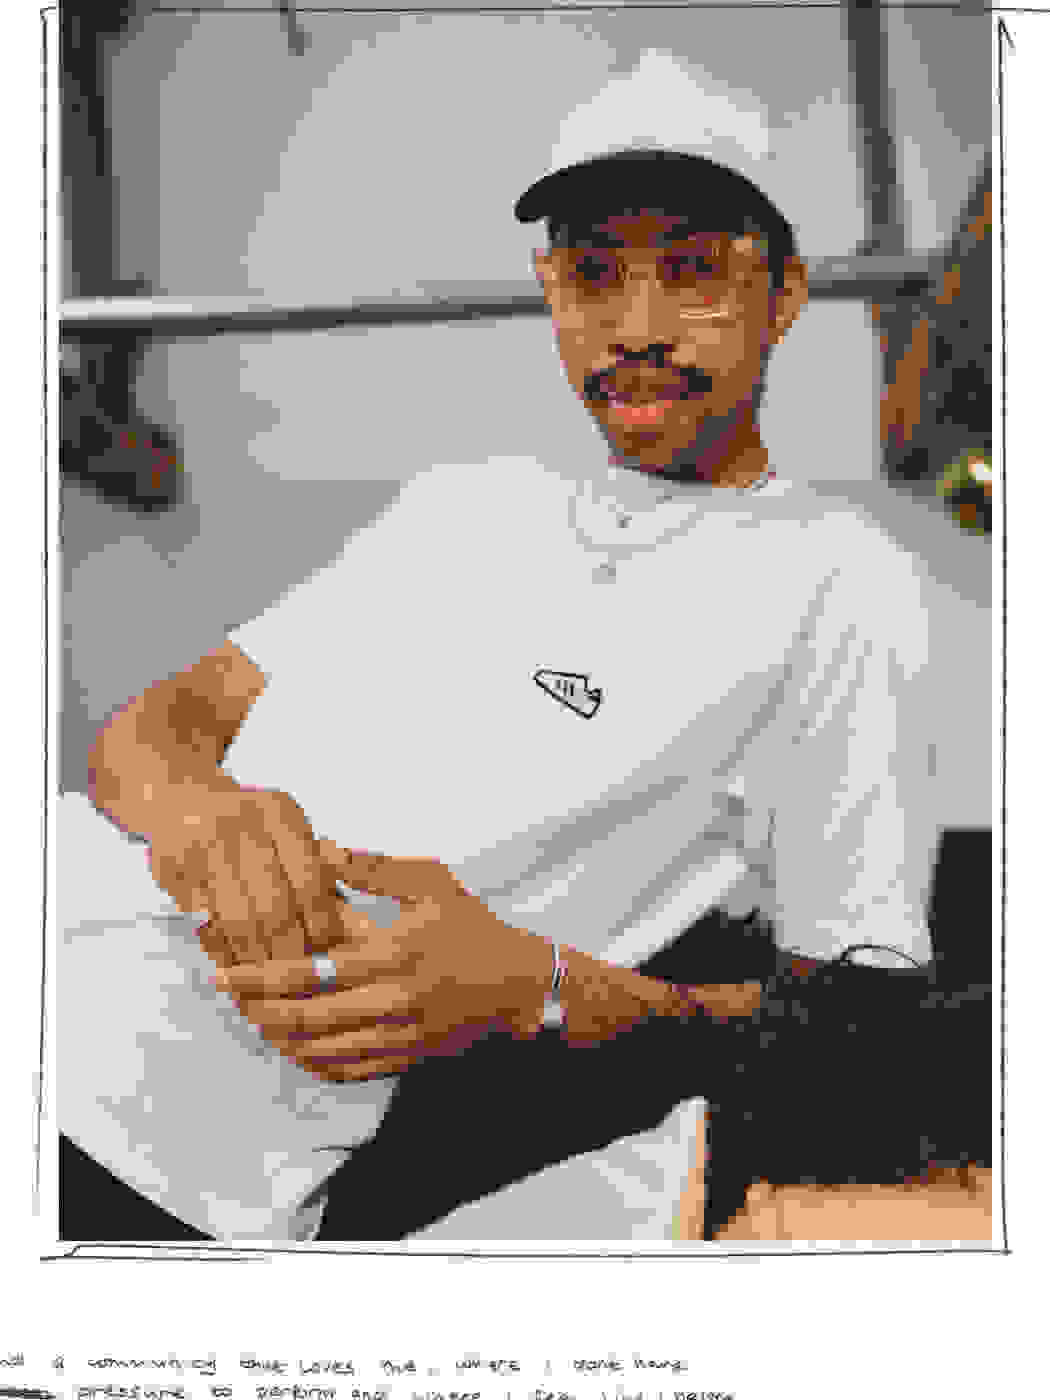 An adiClub member wearing white Stitched Classics white t-shirt and a white cap with black peak, wearing glasses and jewelry, leaning casually on a couch.